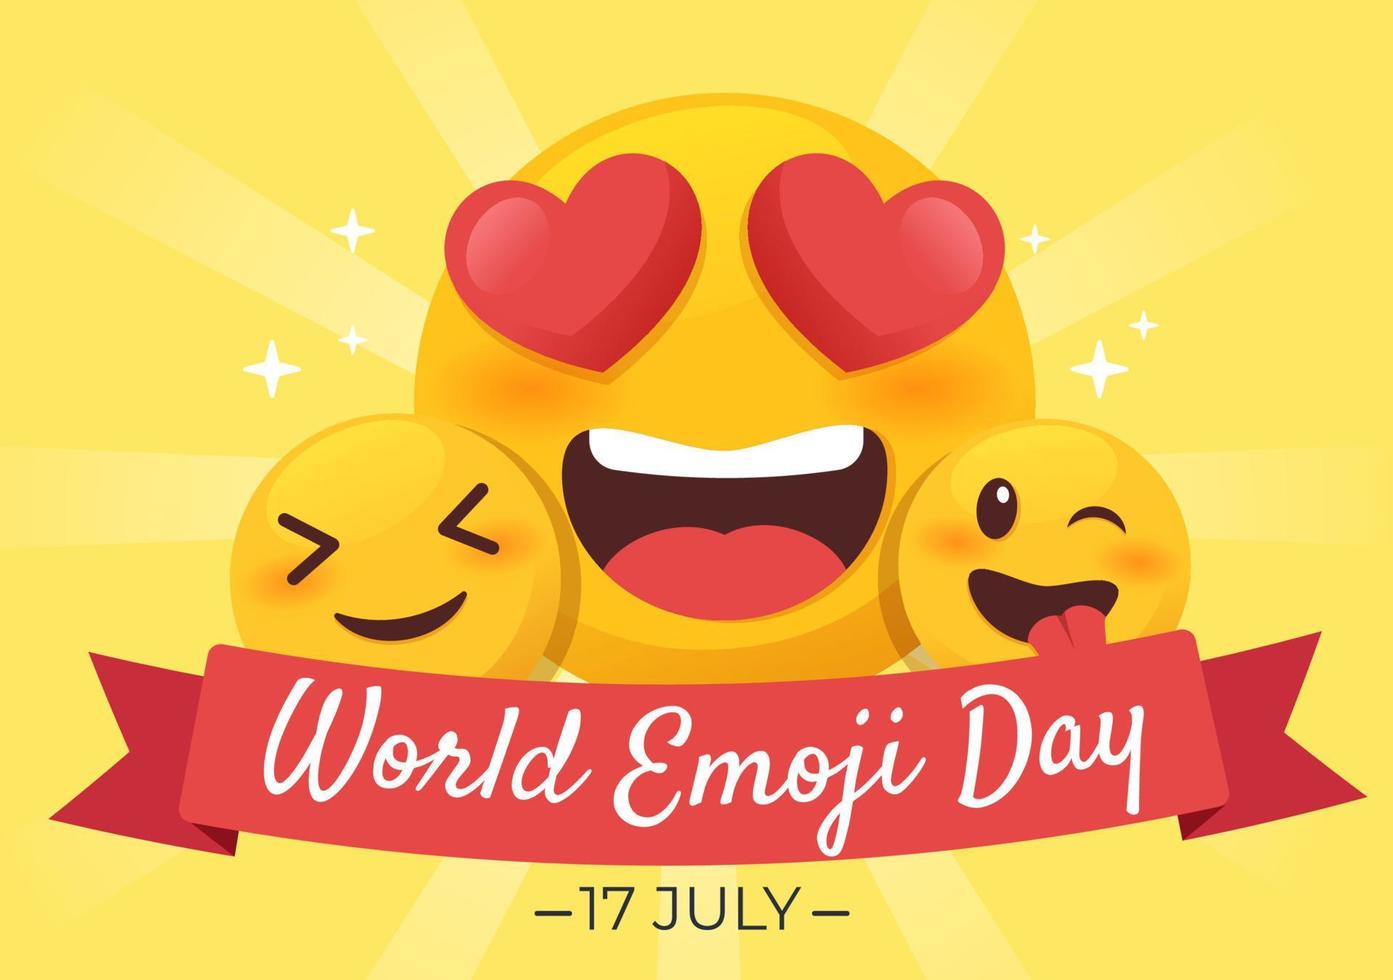 World Emoji Day Celebration with Events and Product Releases in Different Facial Expression Cute Cartoon Form in Flat Background Illustration vector